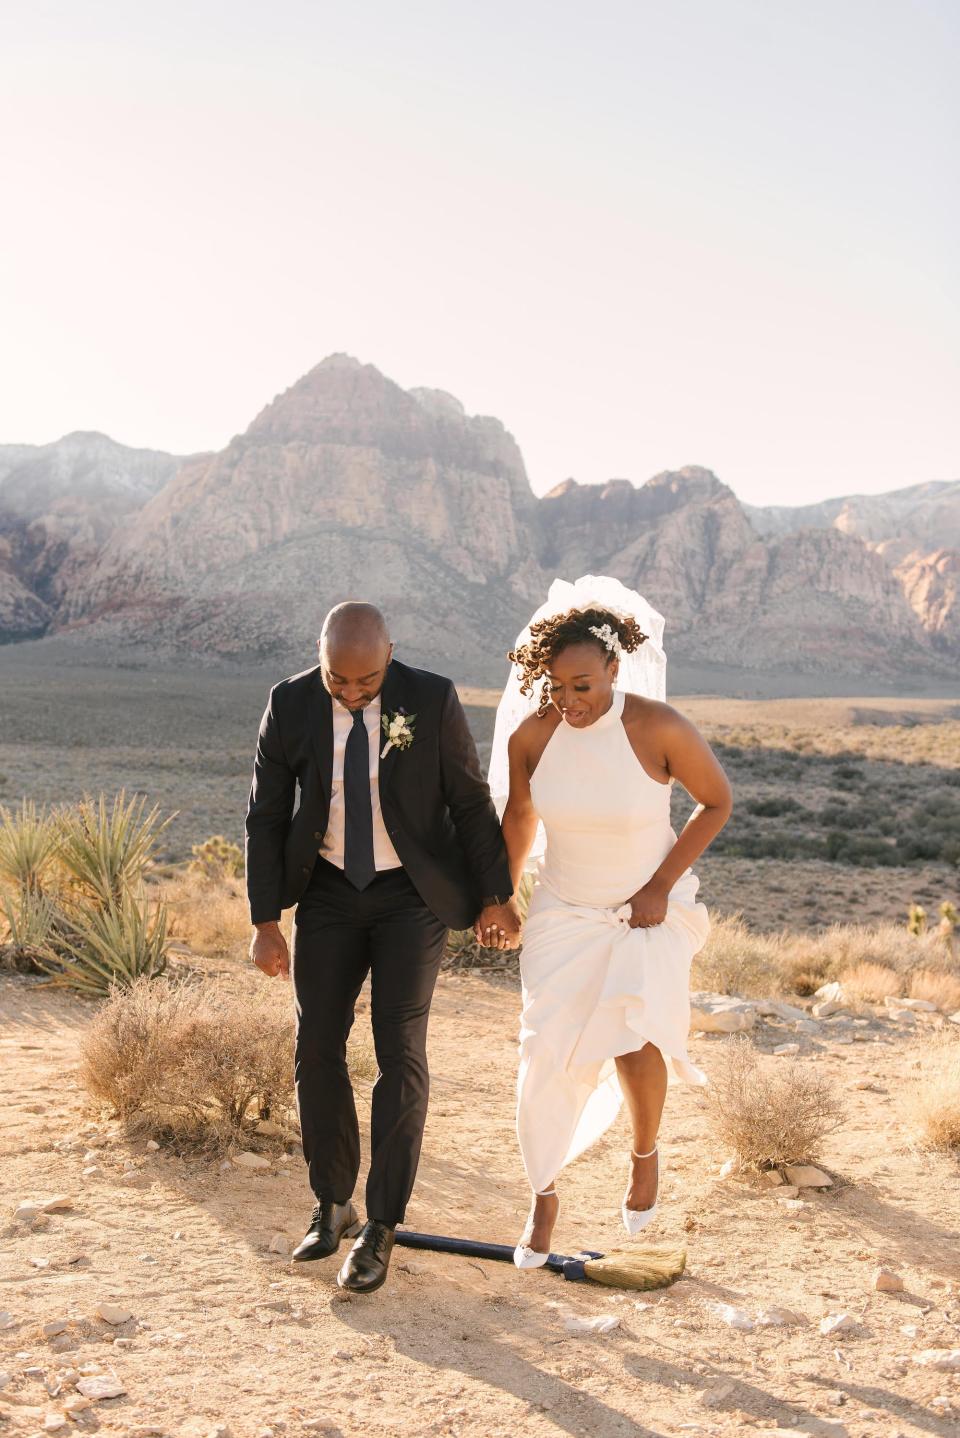 A bride and groom jump the broom in a desert.